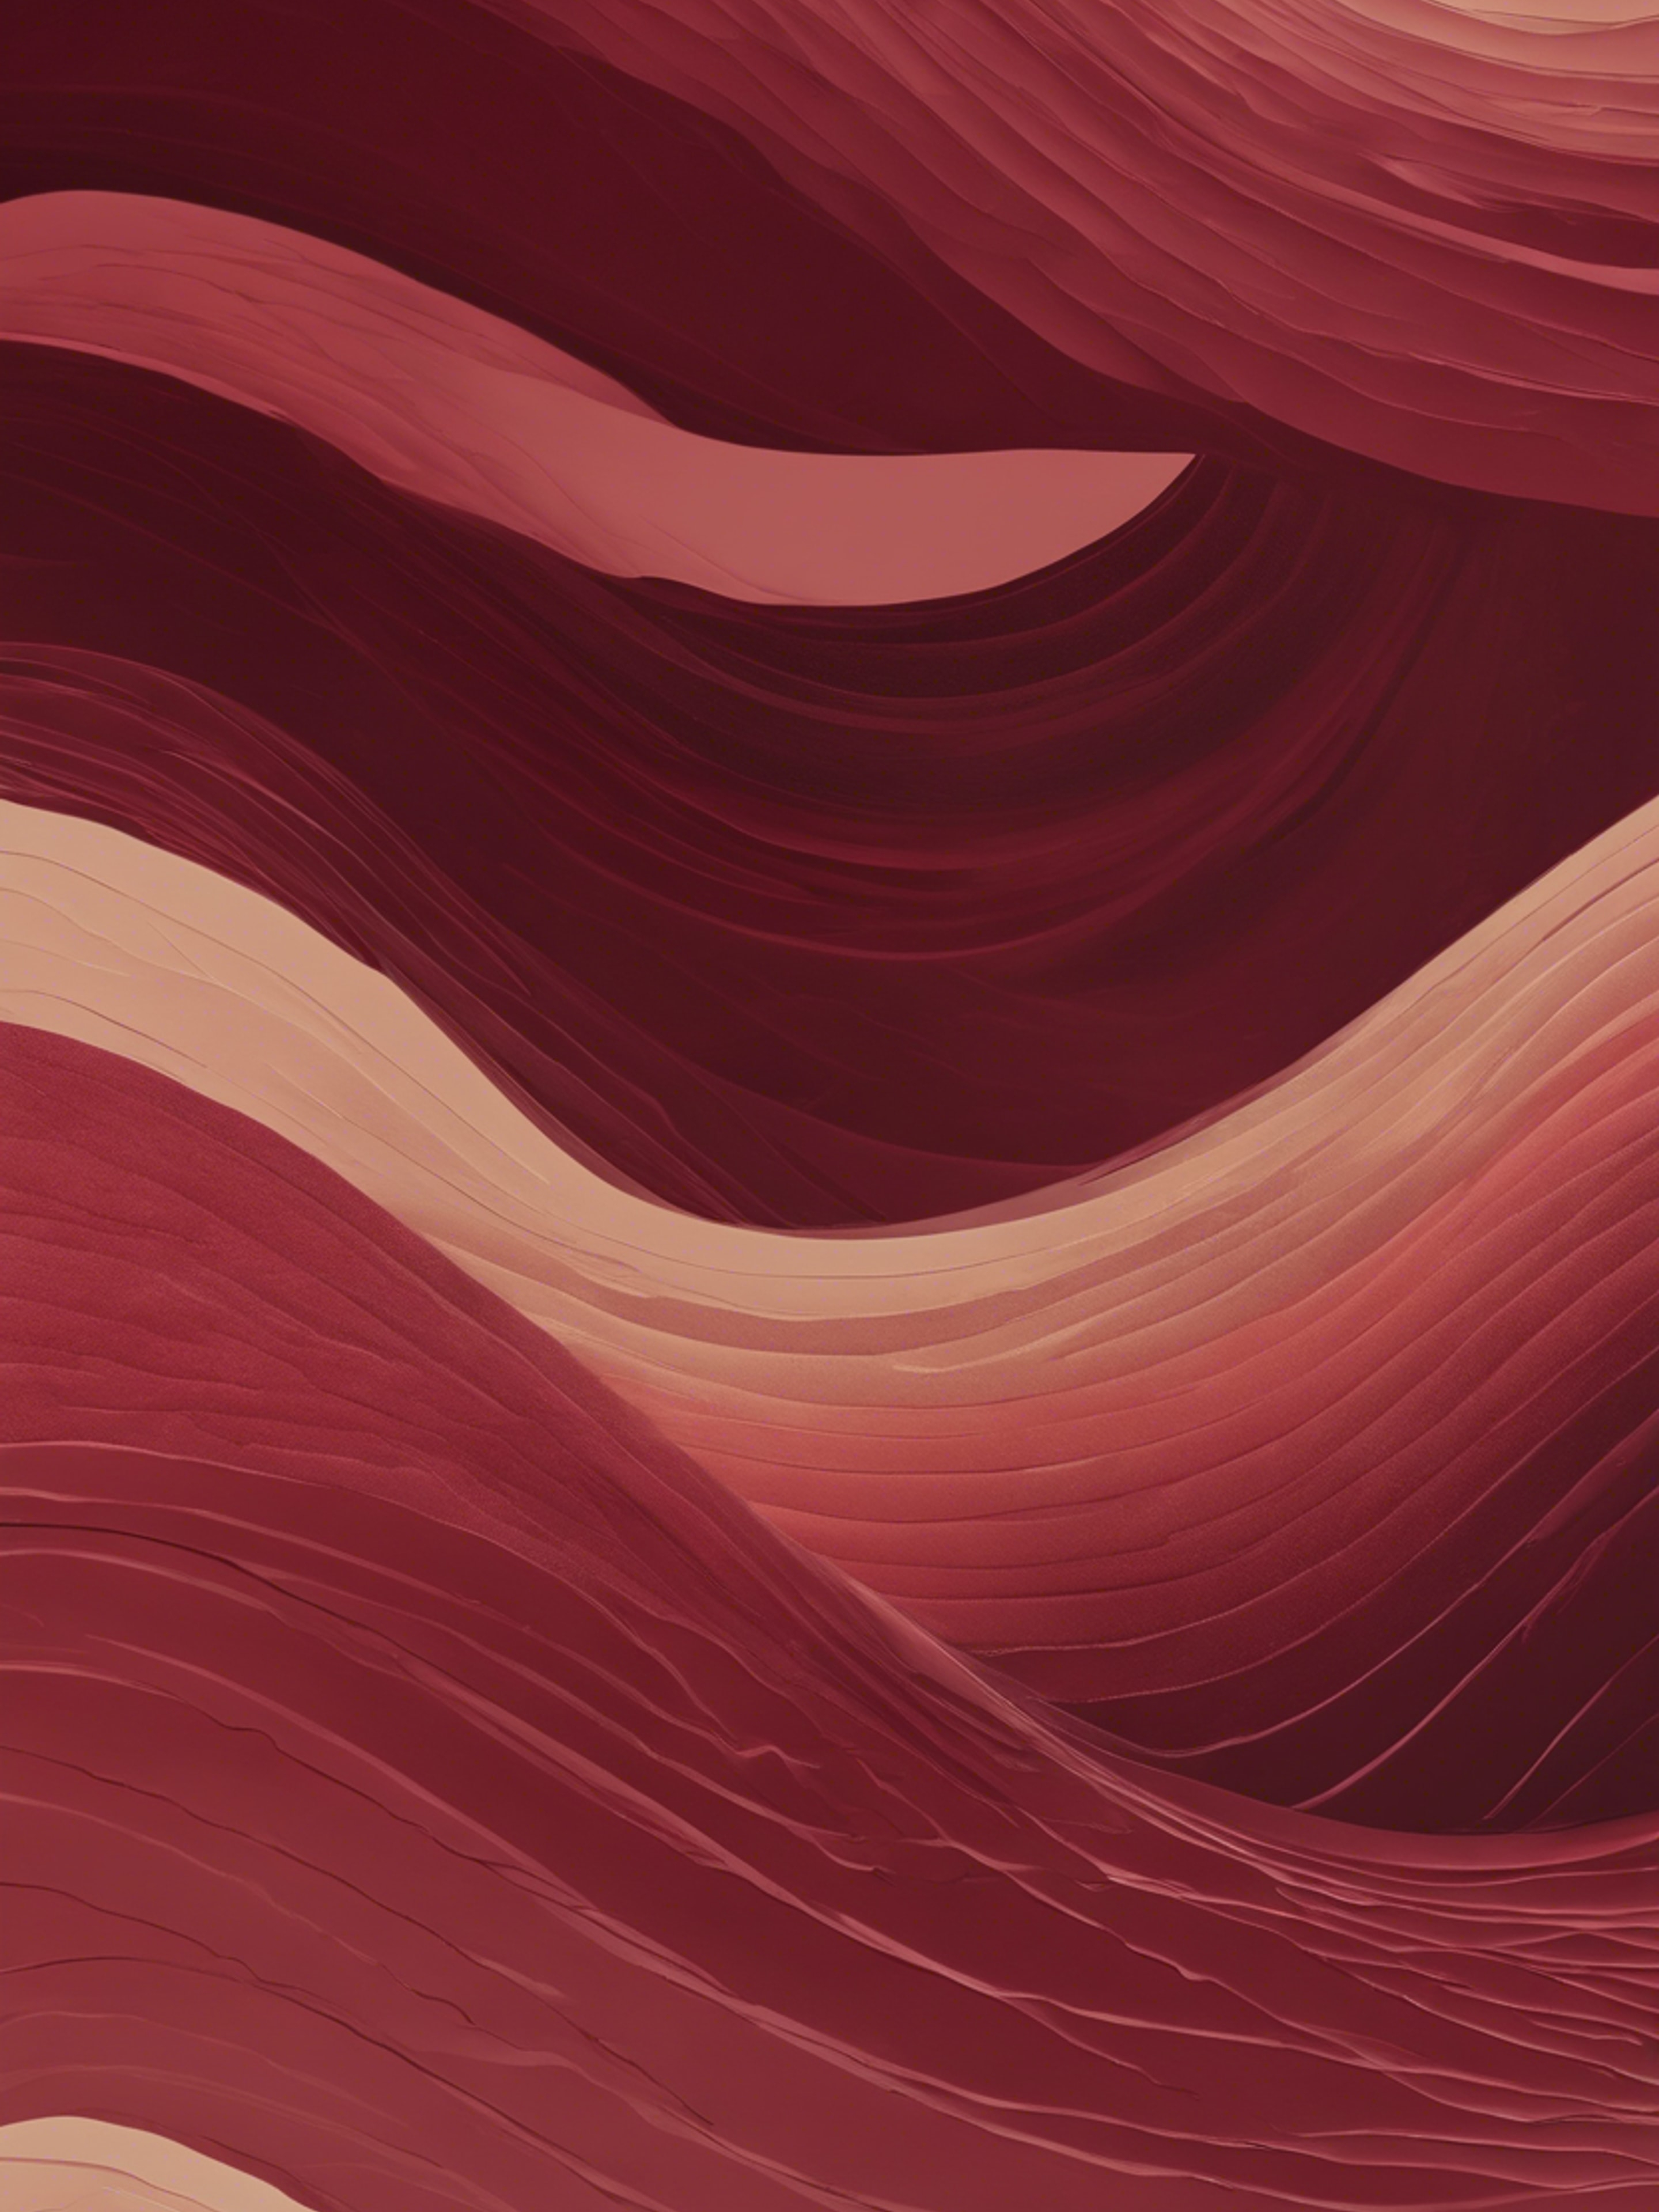 Gradient of maroon to walnut in wave-like strokes, producing a sleek abstract design.壁紙[5b388aaadd4645a584ca]